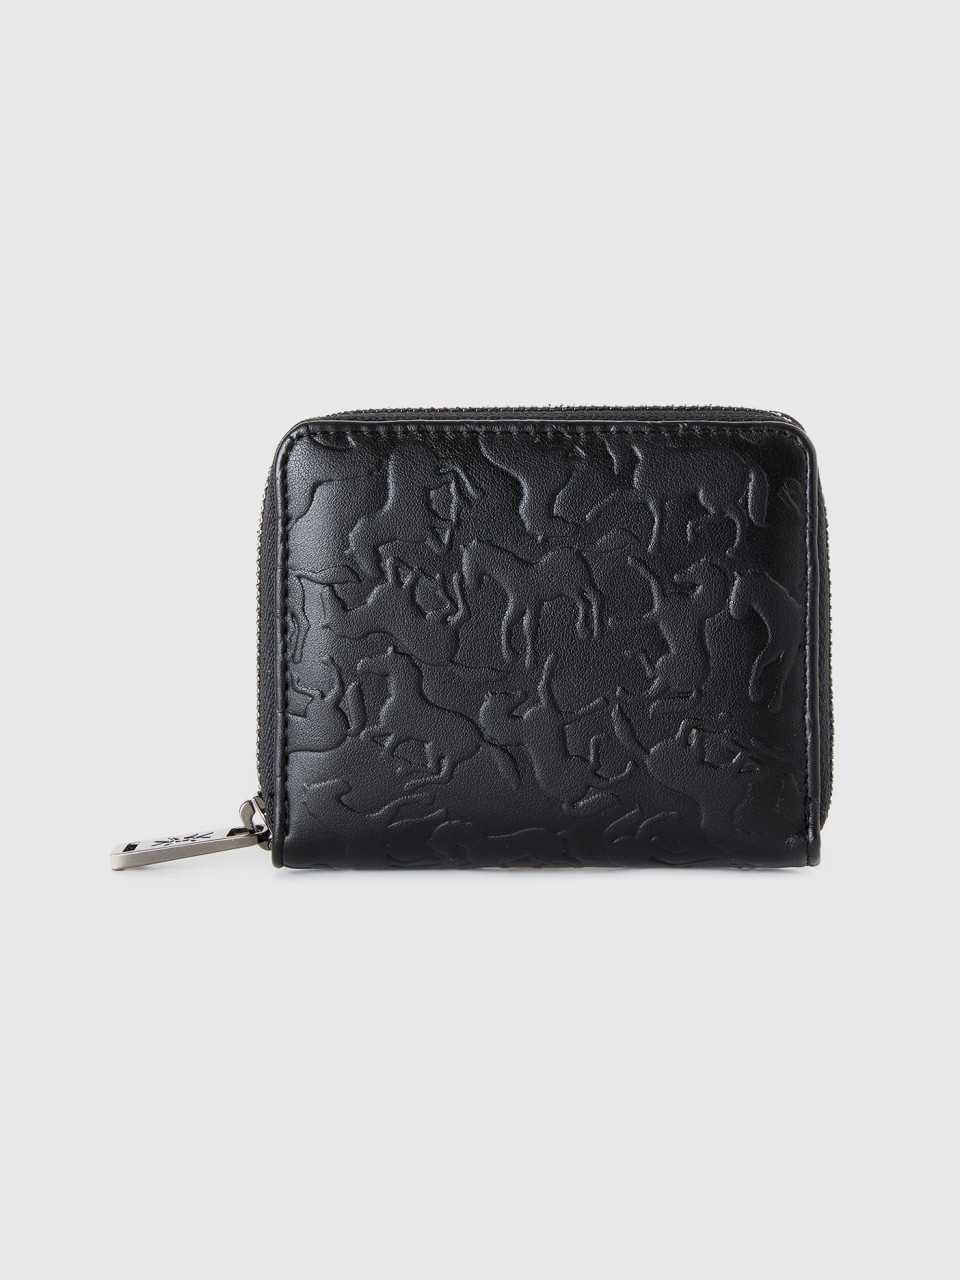 Benetton, Small Wallet With Horse Print, Black, Women